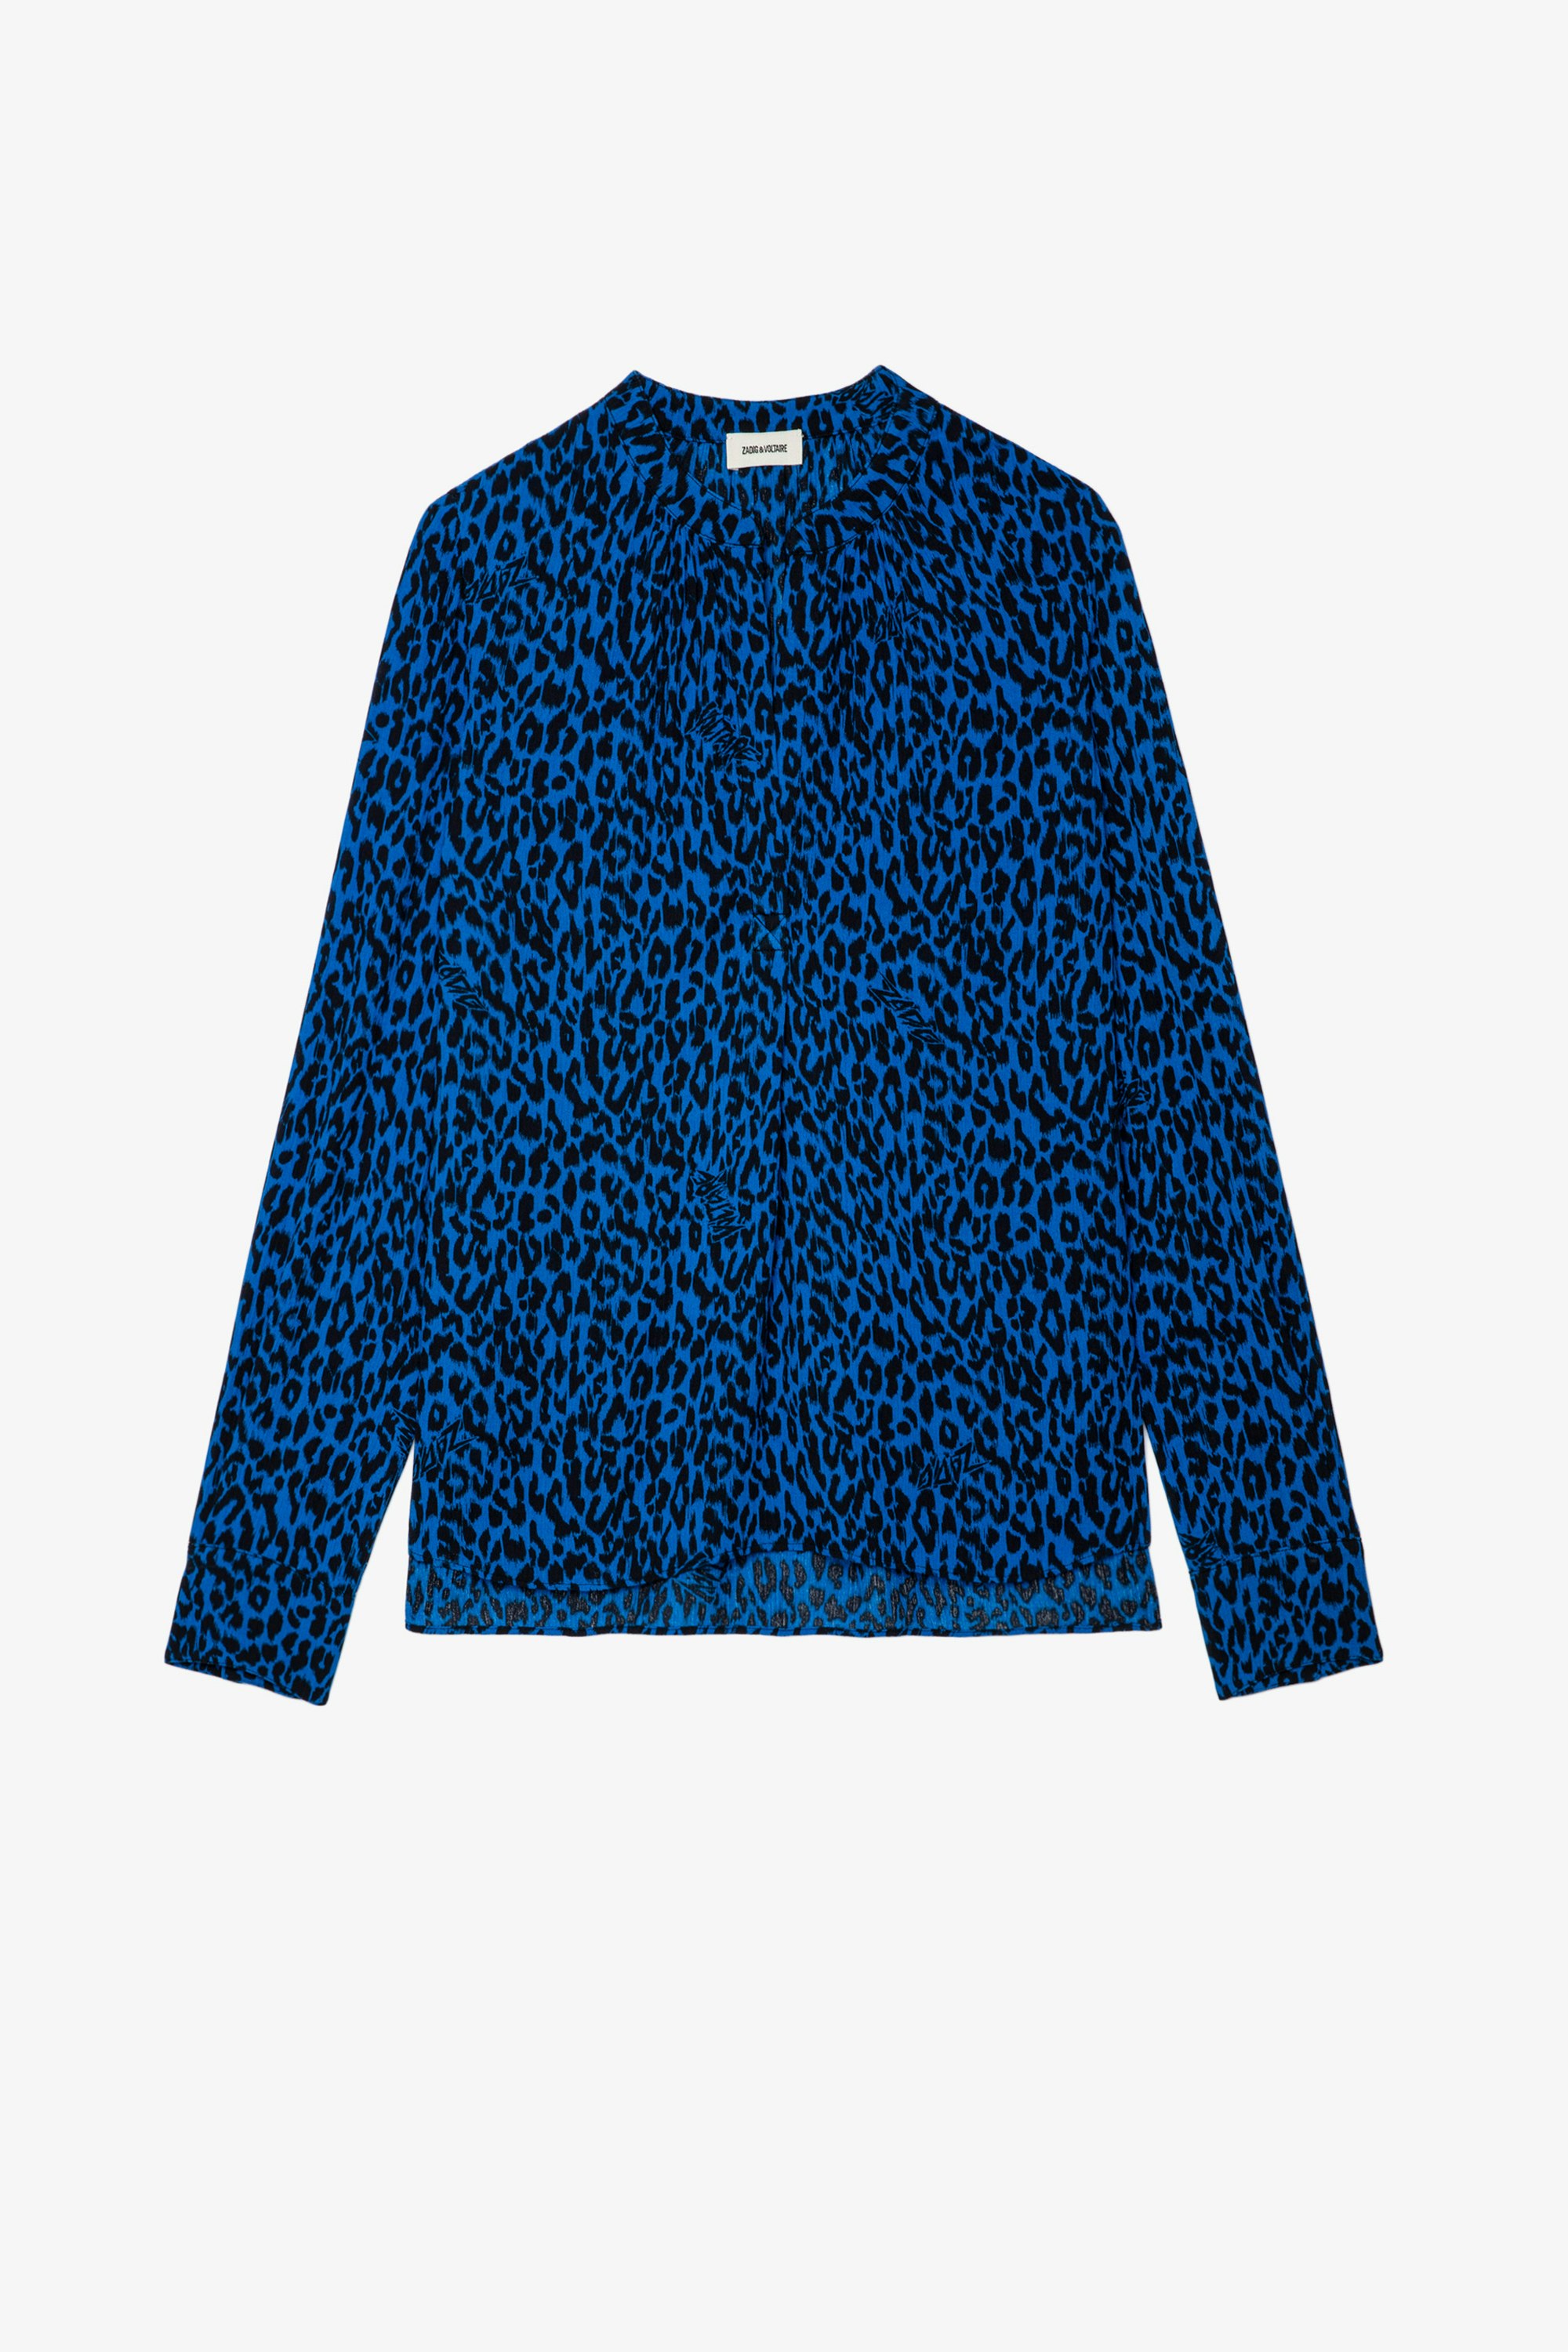 Tink Blouse Women’s blue leopard-print blouse with long-sleeves